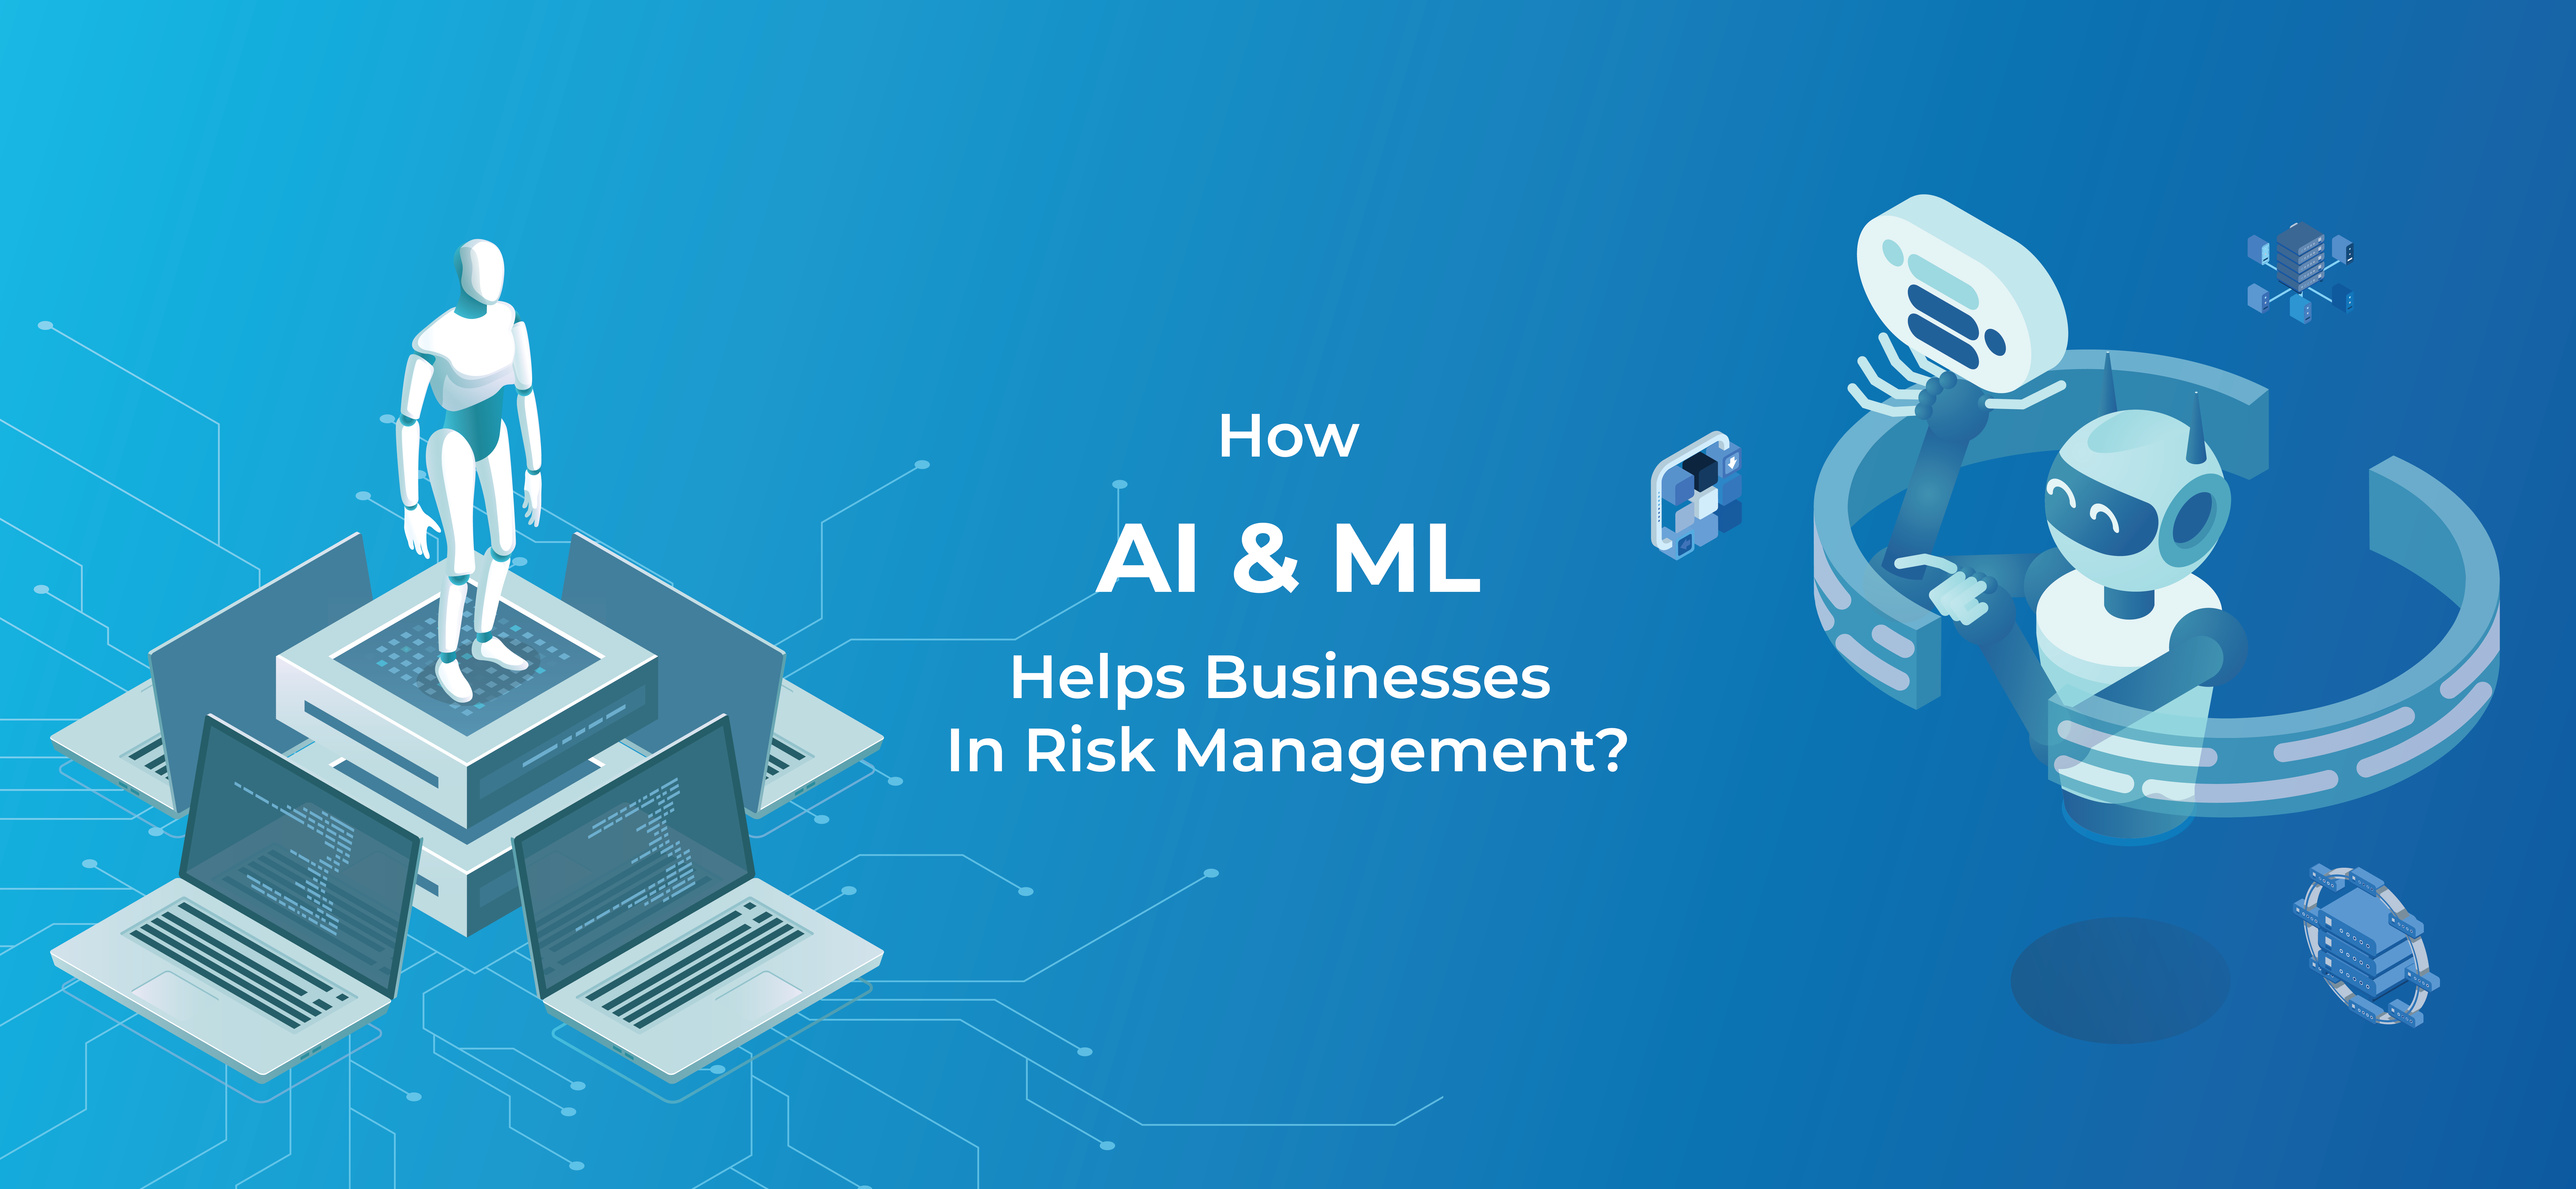 How AI & ML Helps Businesses in Risk Management?